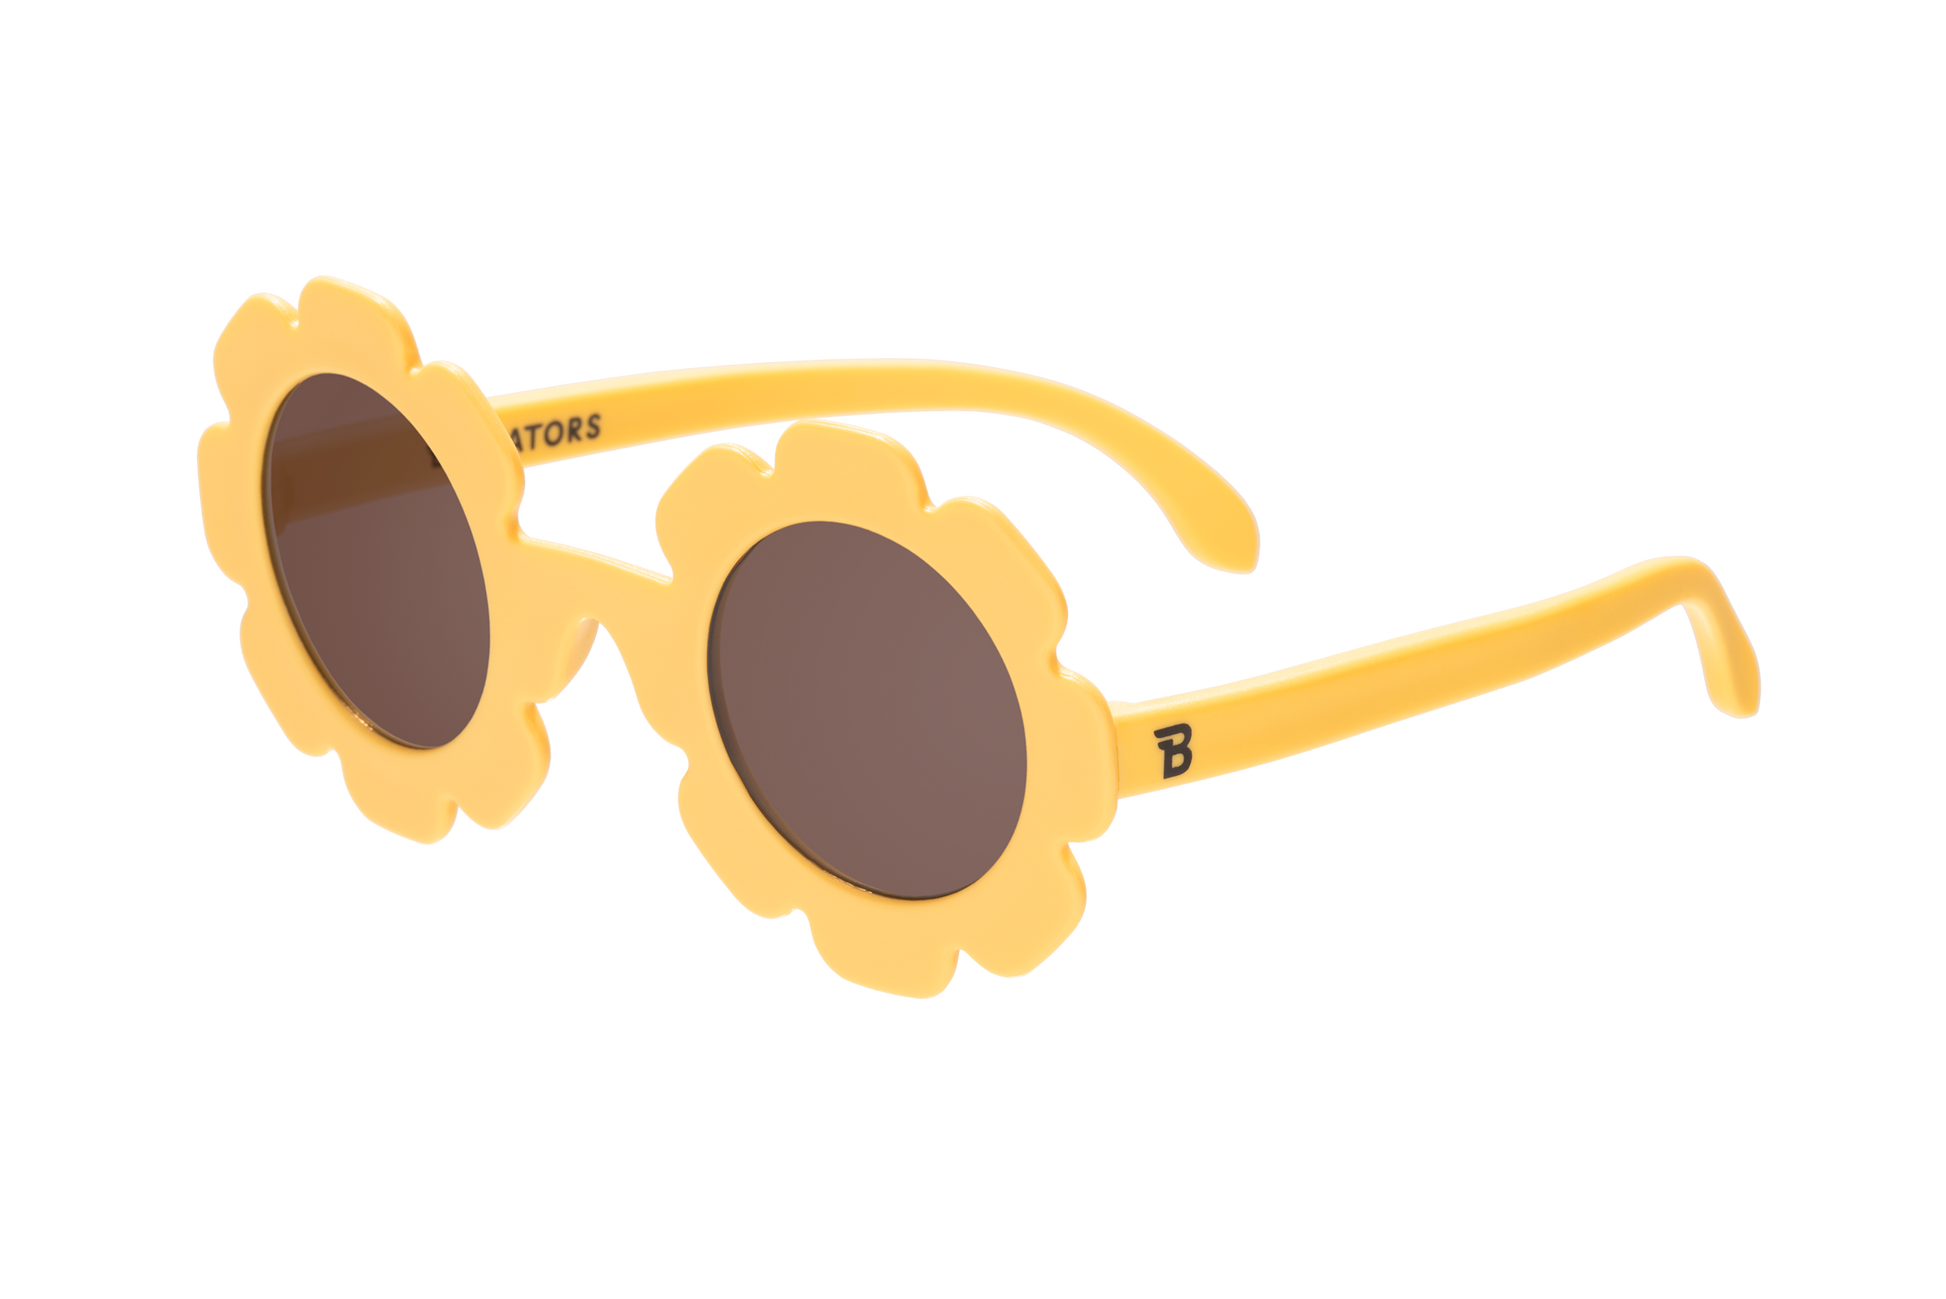 Limited Edition flowers mirrored Sunglasses: " Sweet Sunflower"